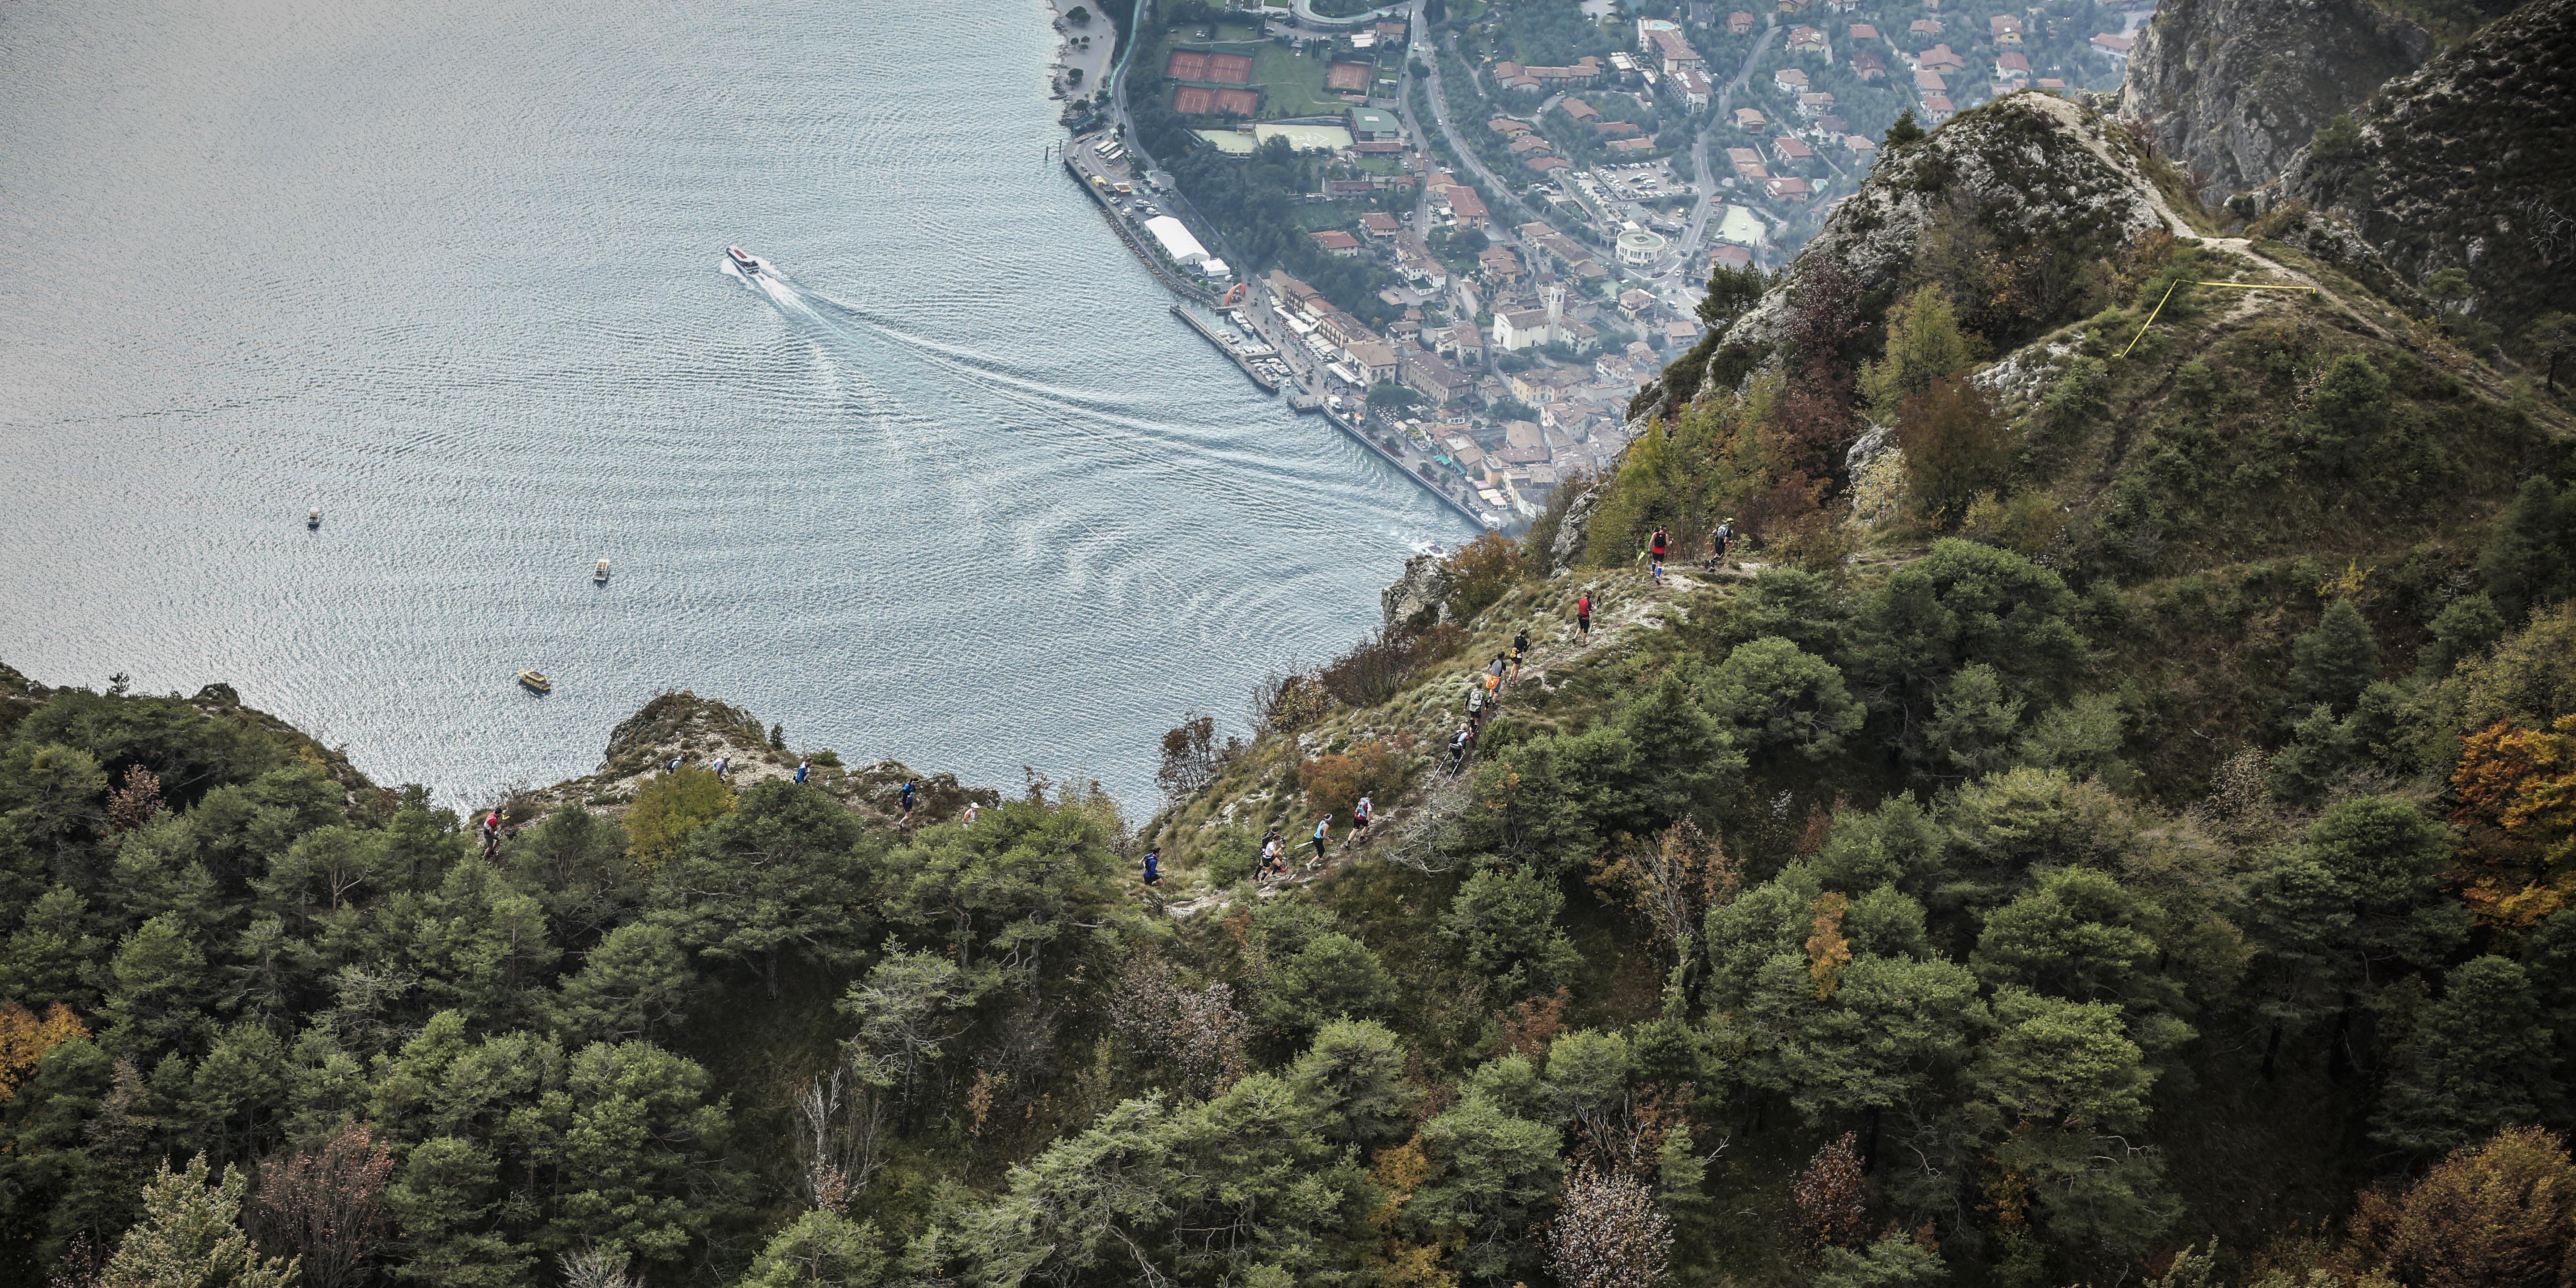 A long way down to the lake. Limone Extreme. (c)iancorless.com